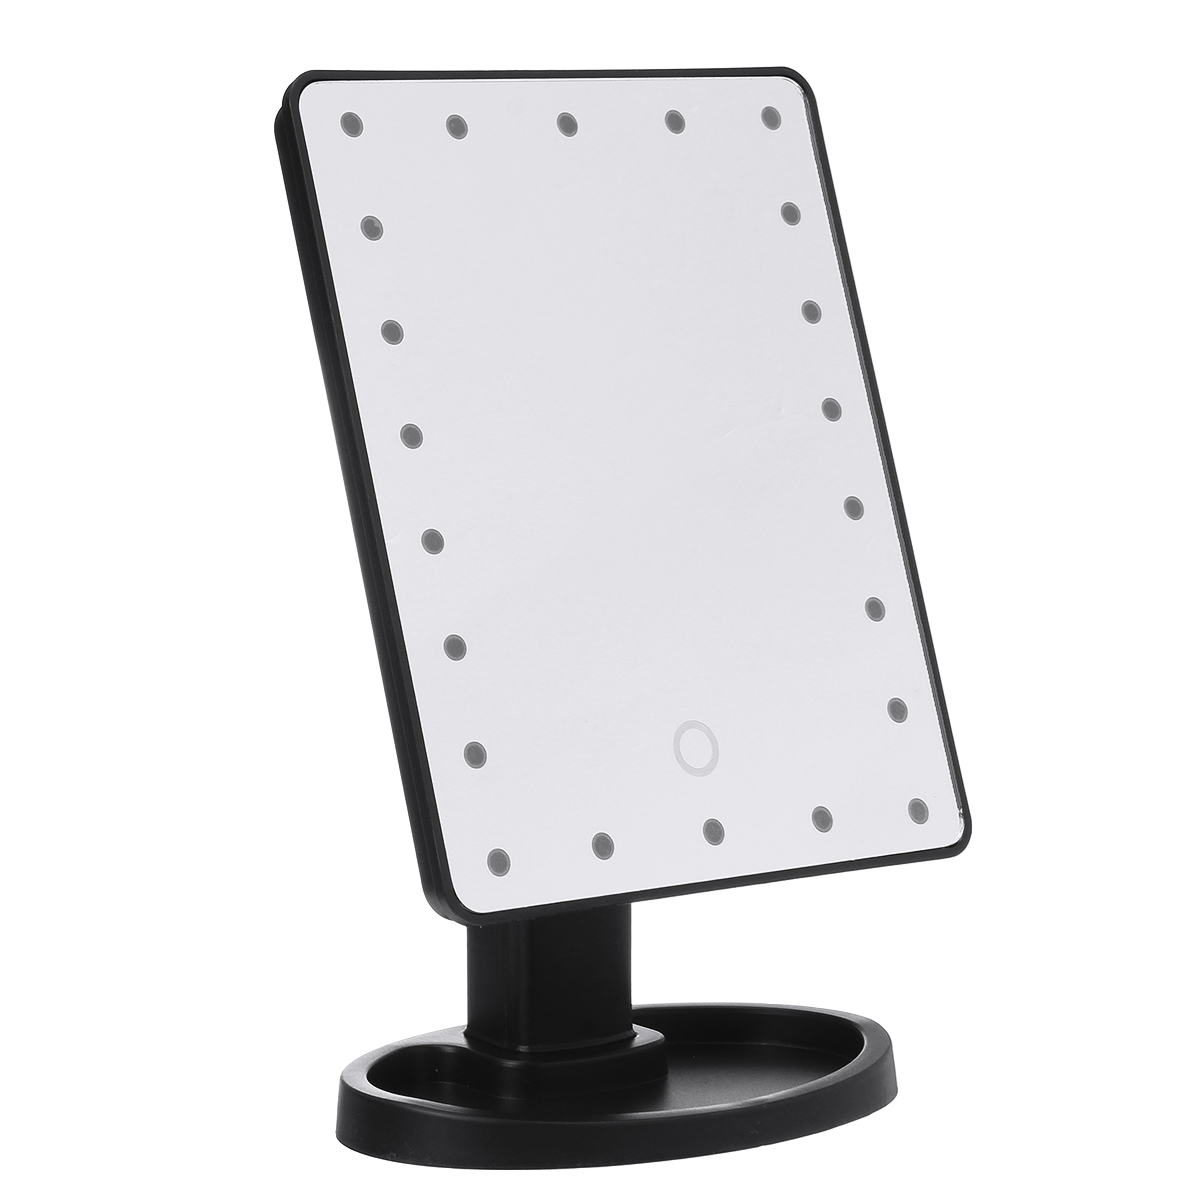 

USB 22 LED Lights Makeup Mirror Lamp Portable Rotated Touch Screen Tabletop Light